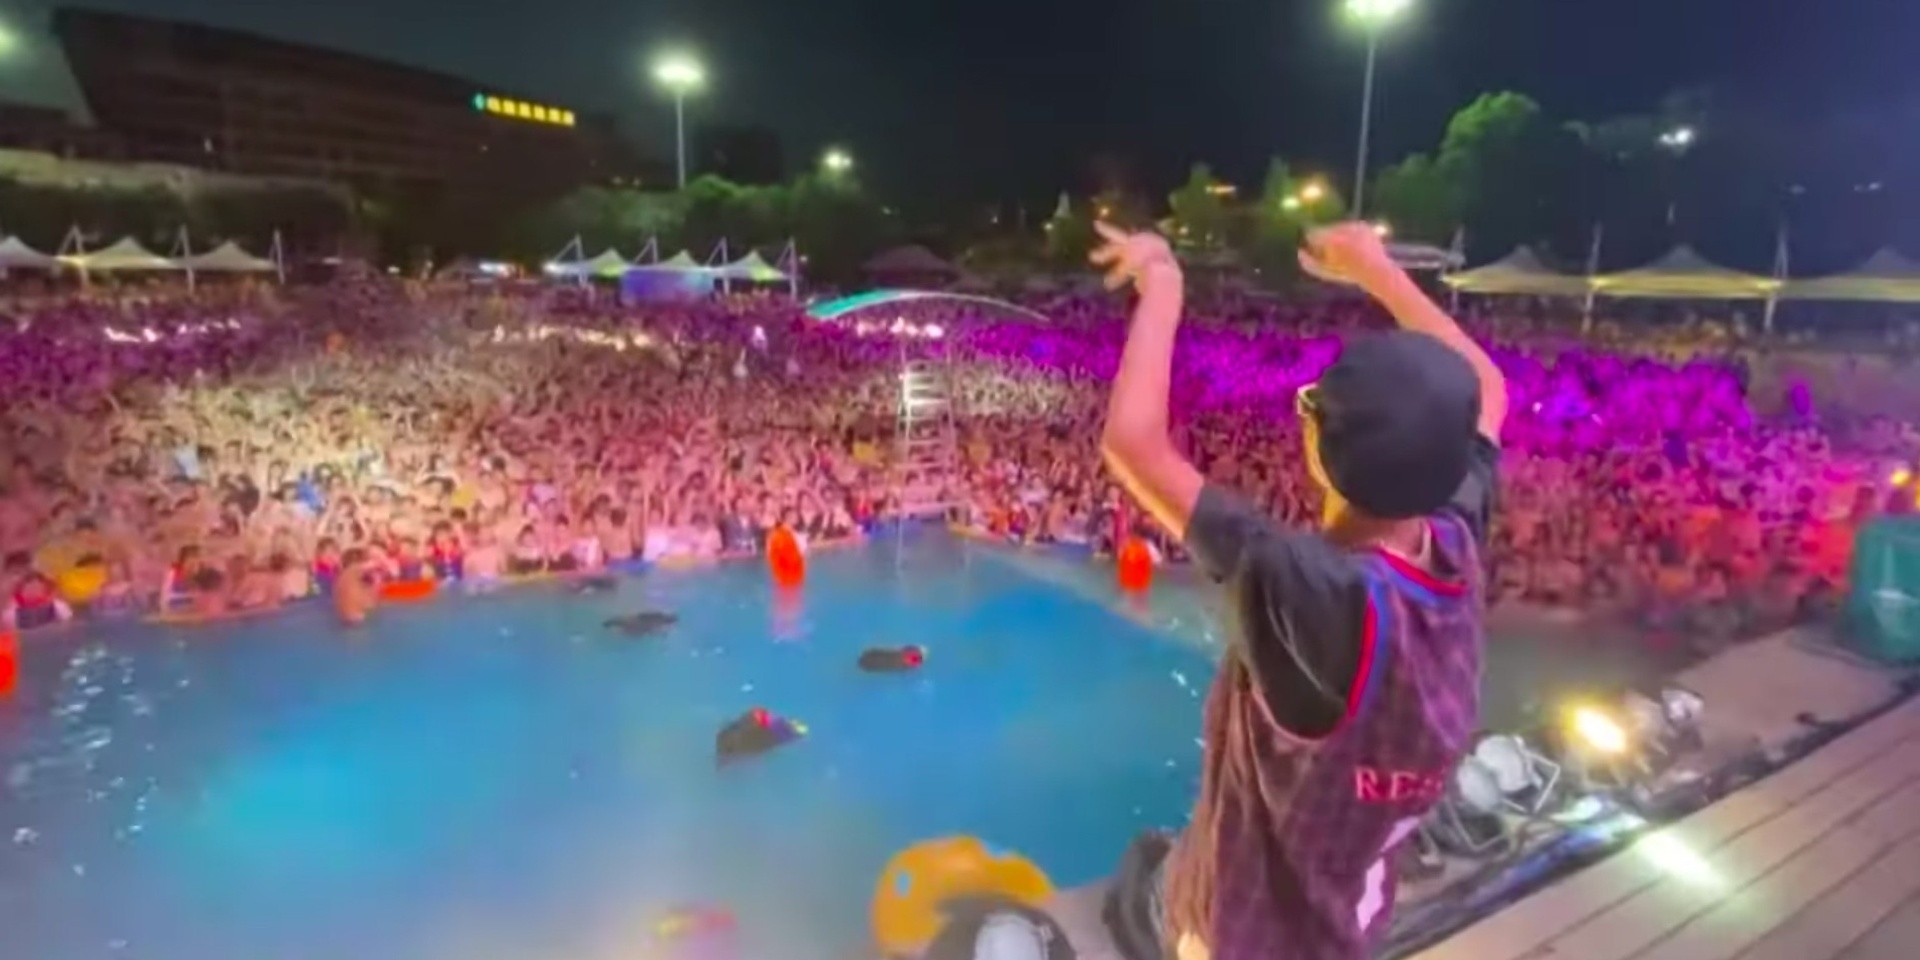 Partygoers flock to Wuhan water park for electronic music festival – watch